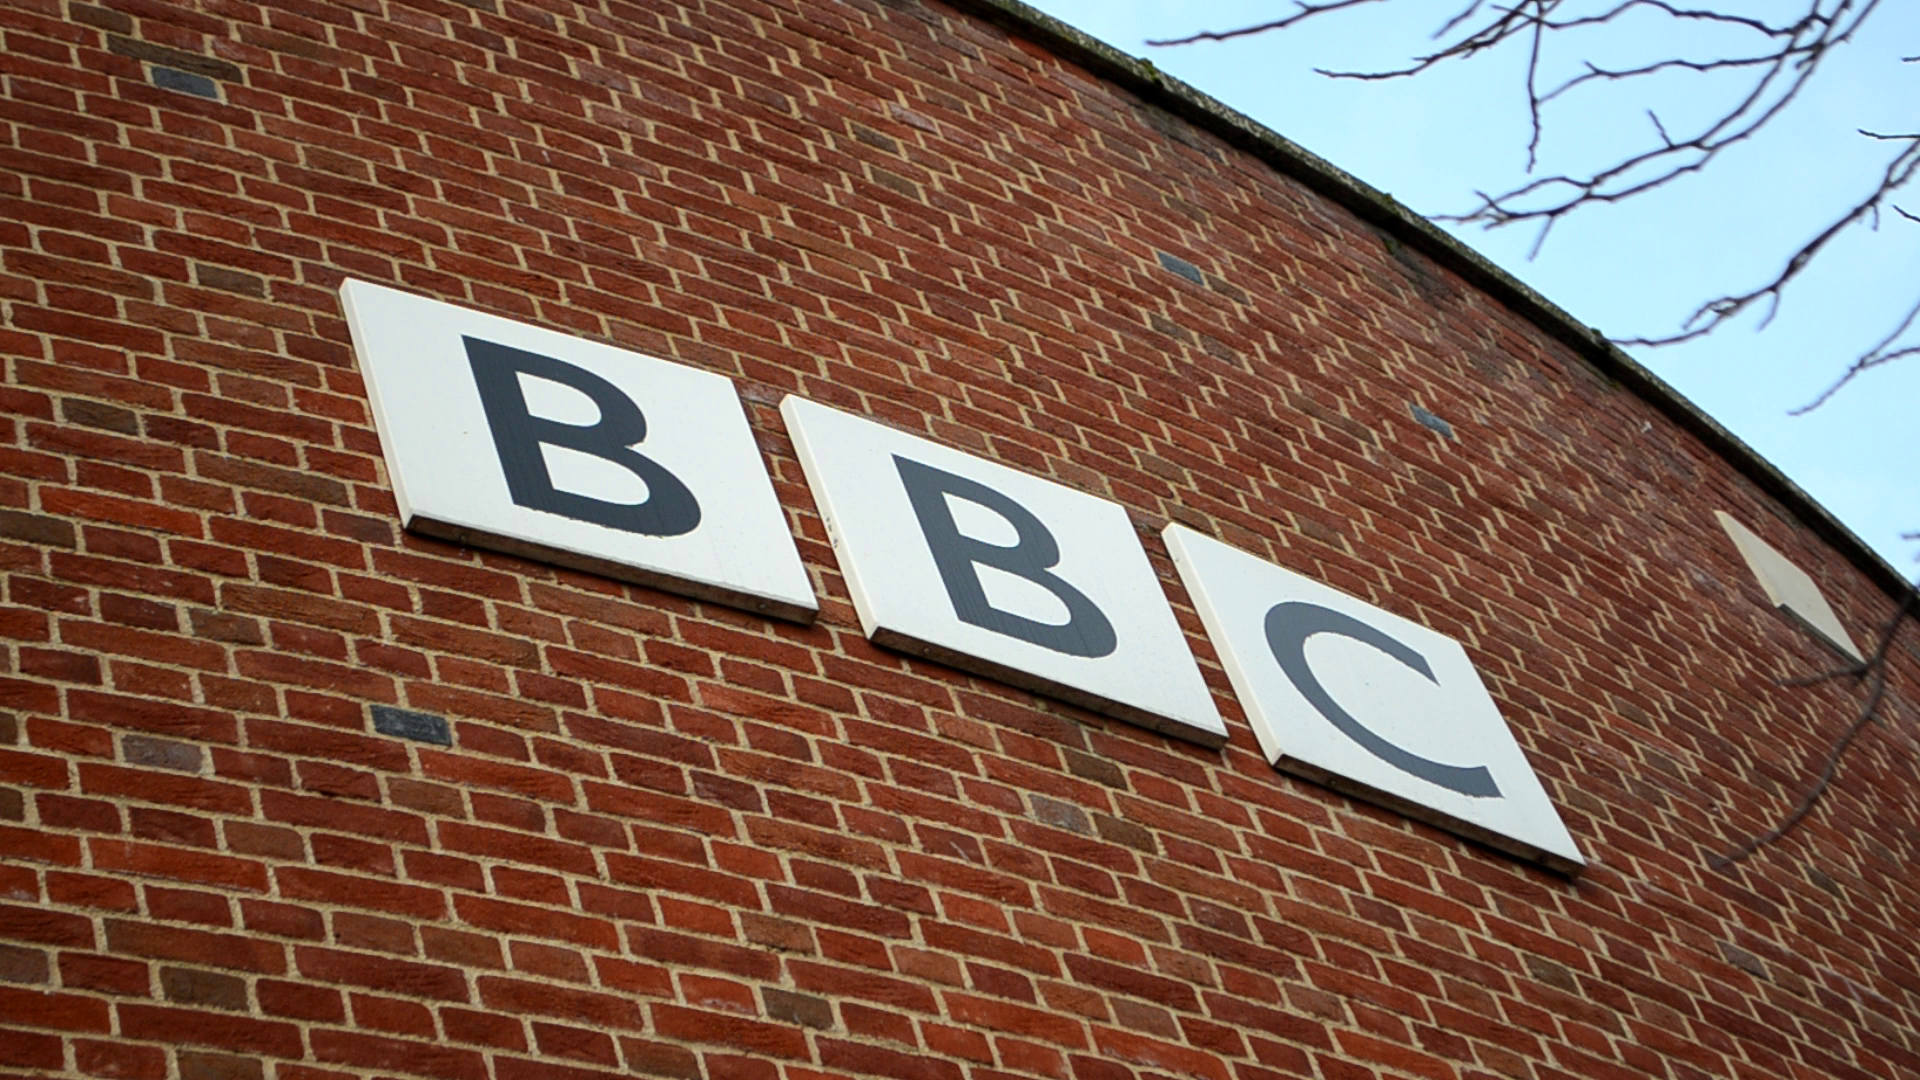 BBC apologises to transphobes; The BBC logo on a curved red-brick wall. BBC's Obfuscation of Transphobia article.